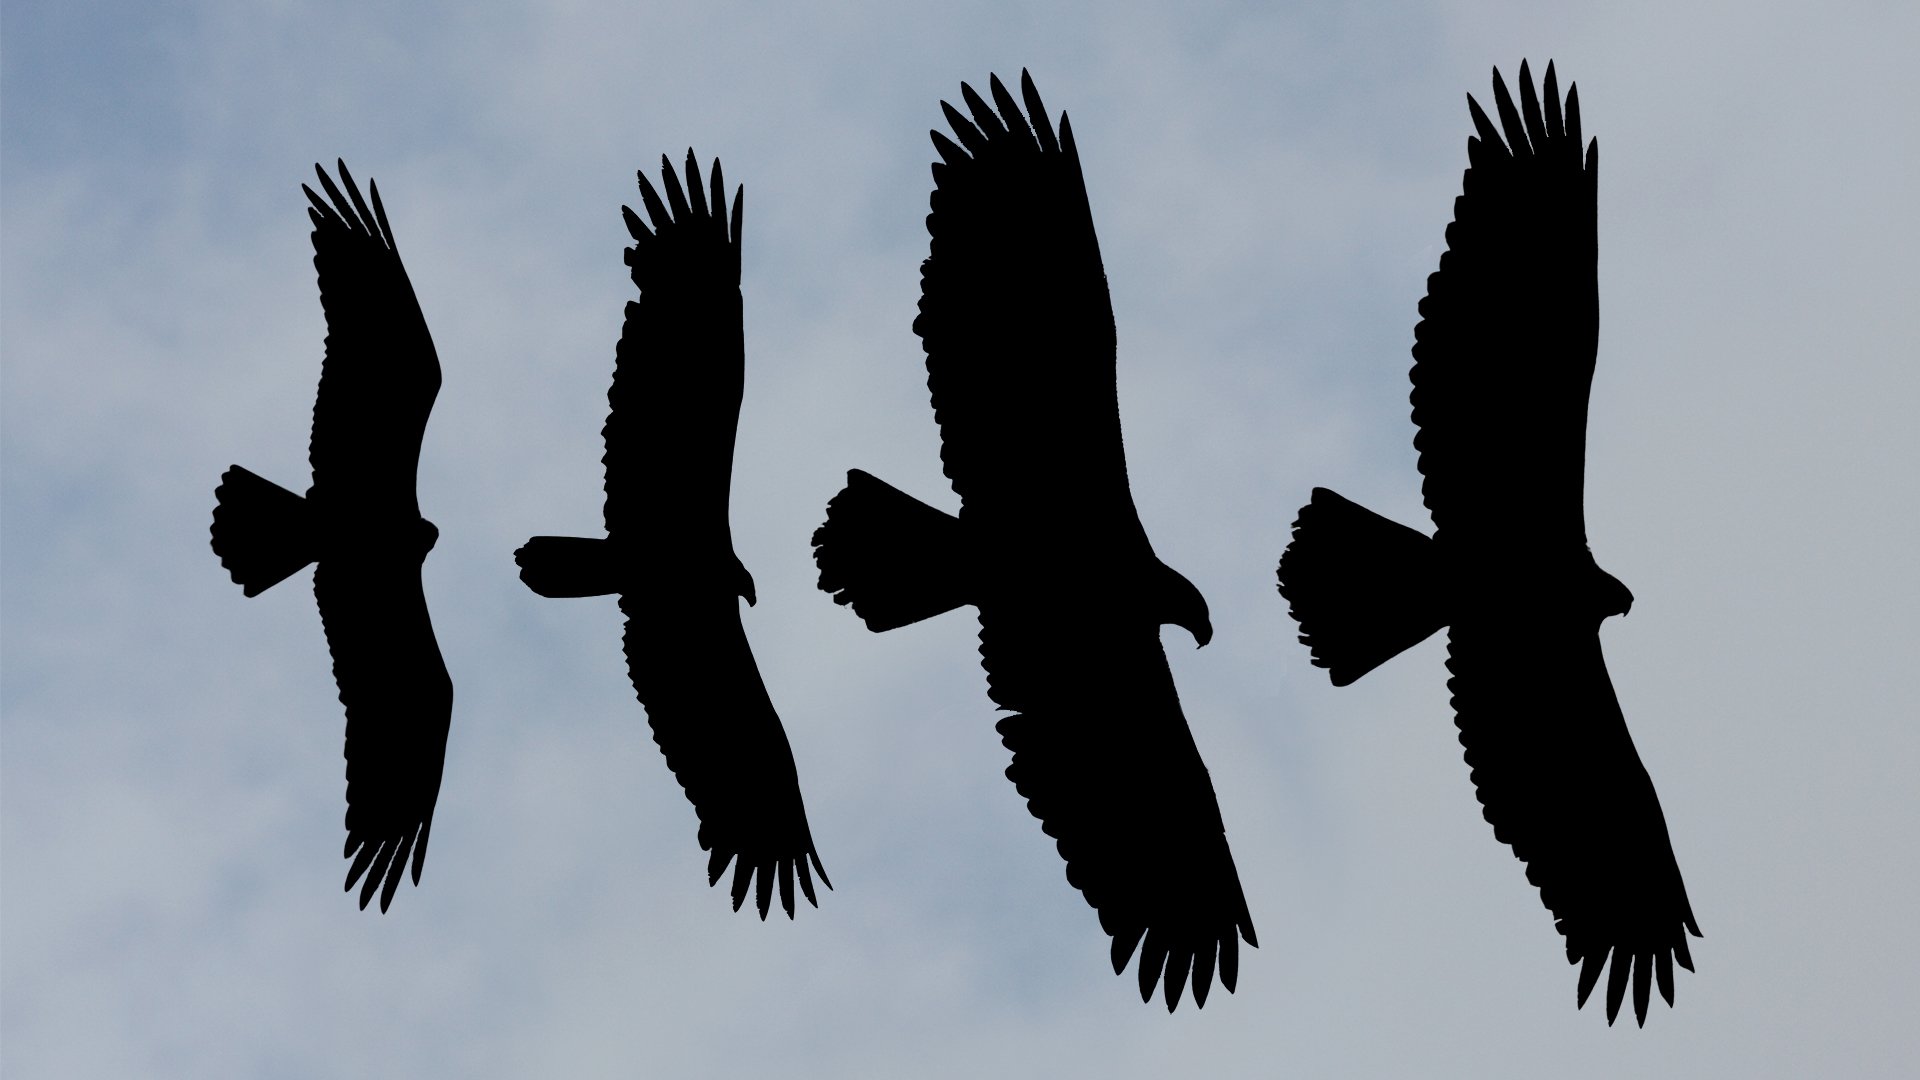 From Left to Right: Osprey, Turkey Vulture, Bald Eagle, Golden Eagle